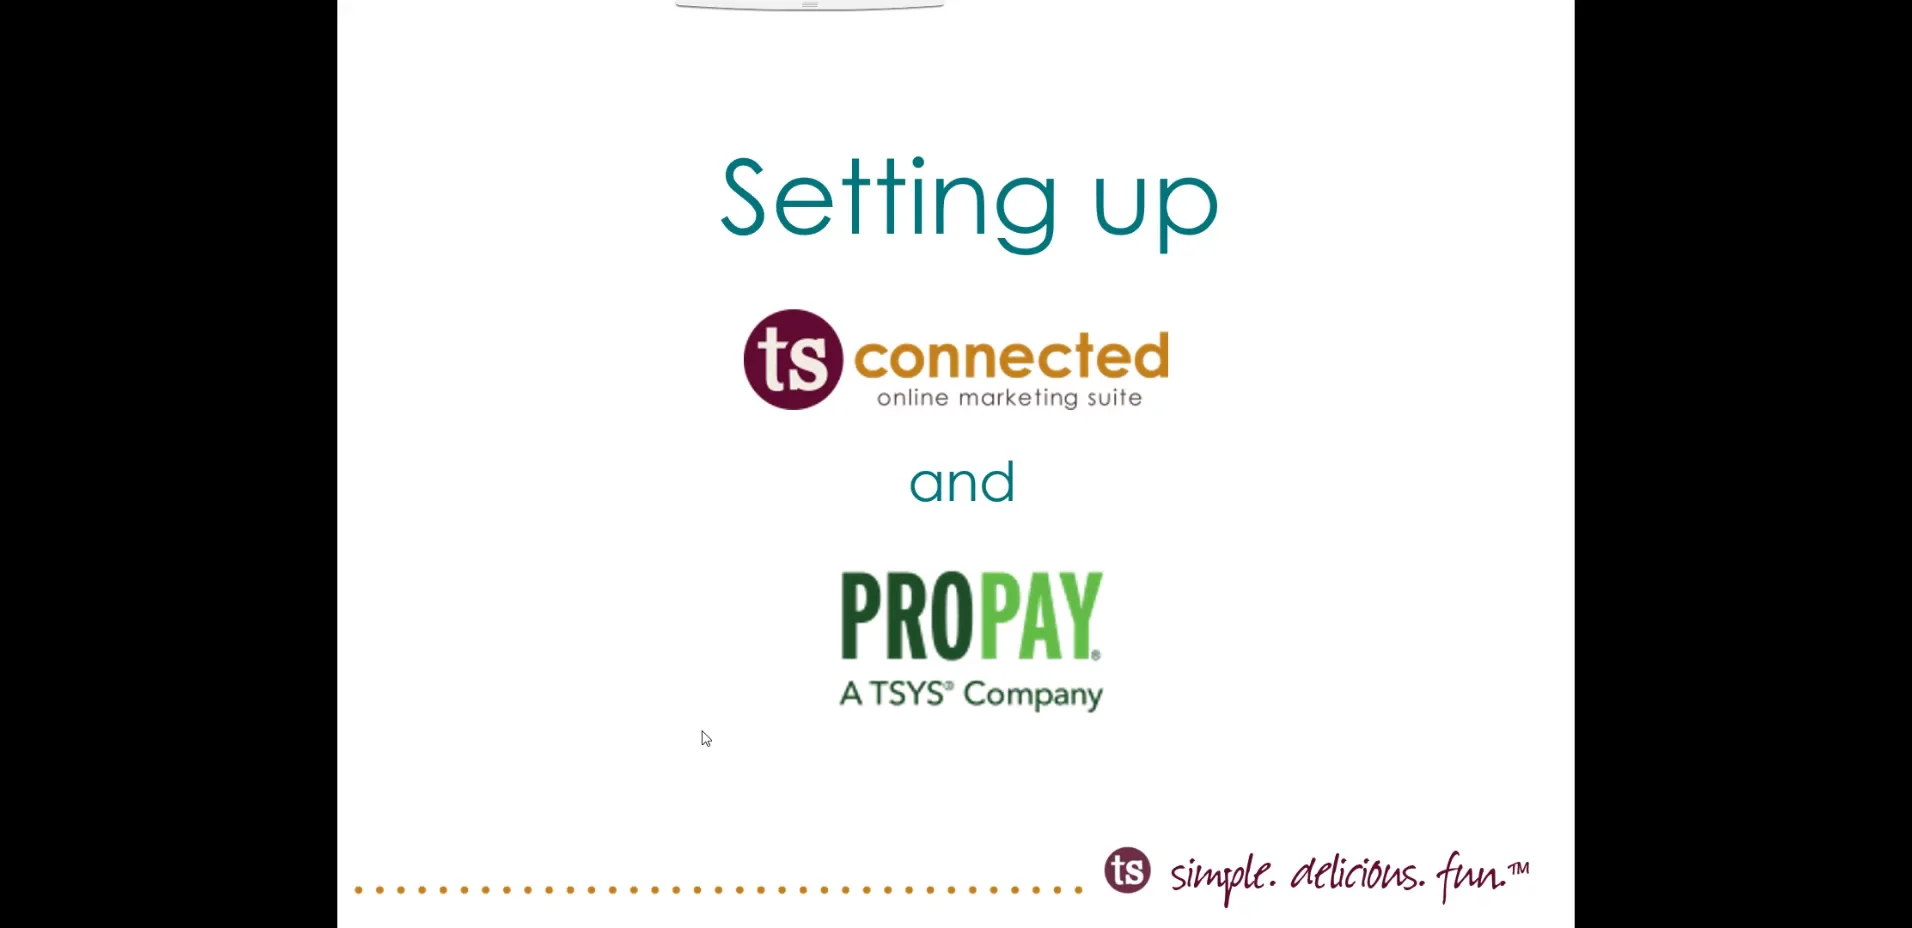 ProPay & ProPay